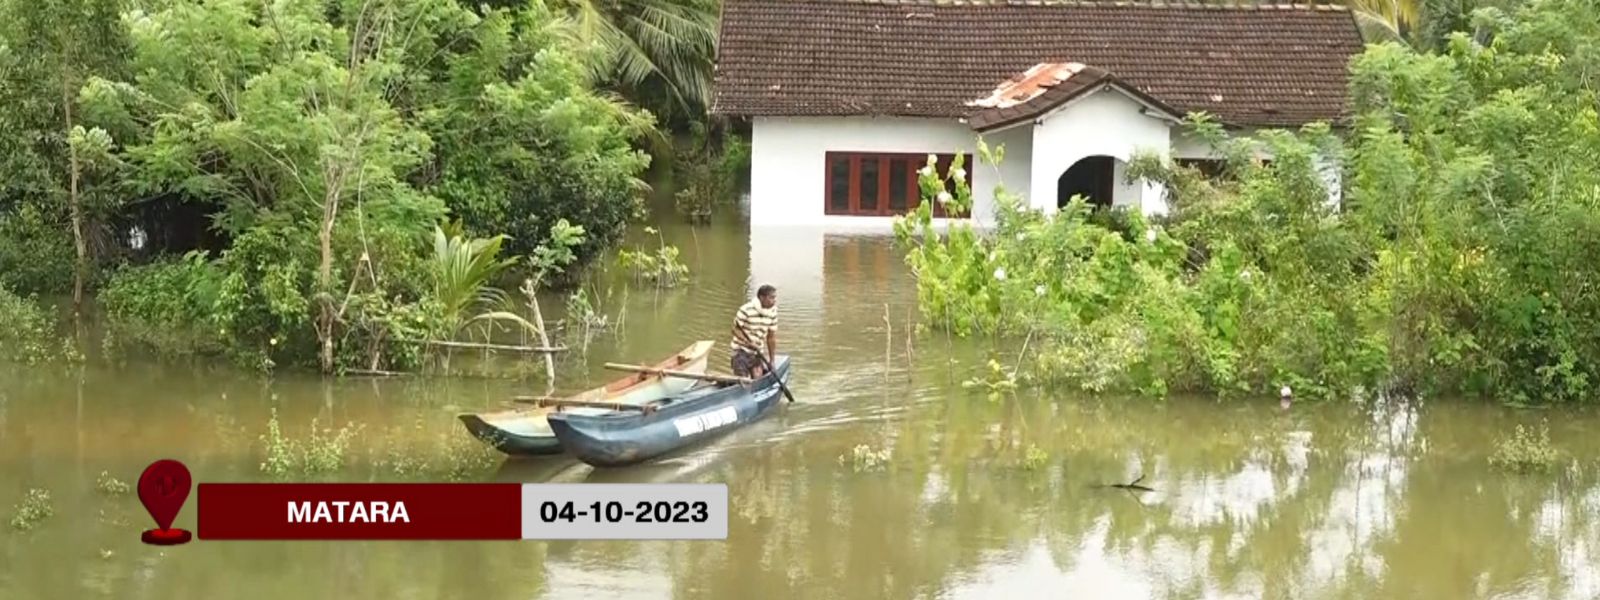 Directives from President for Matara flood relief